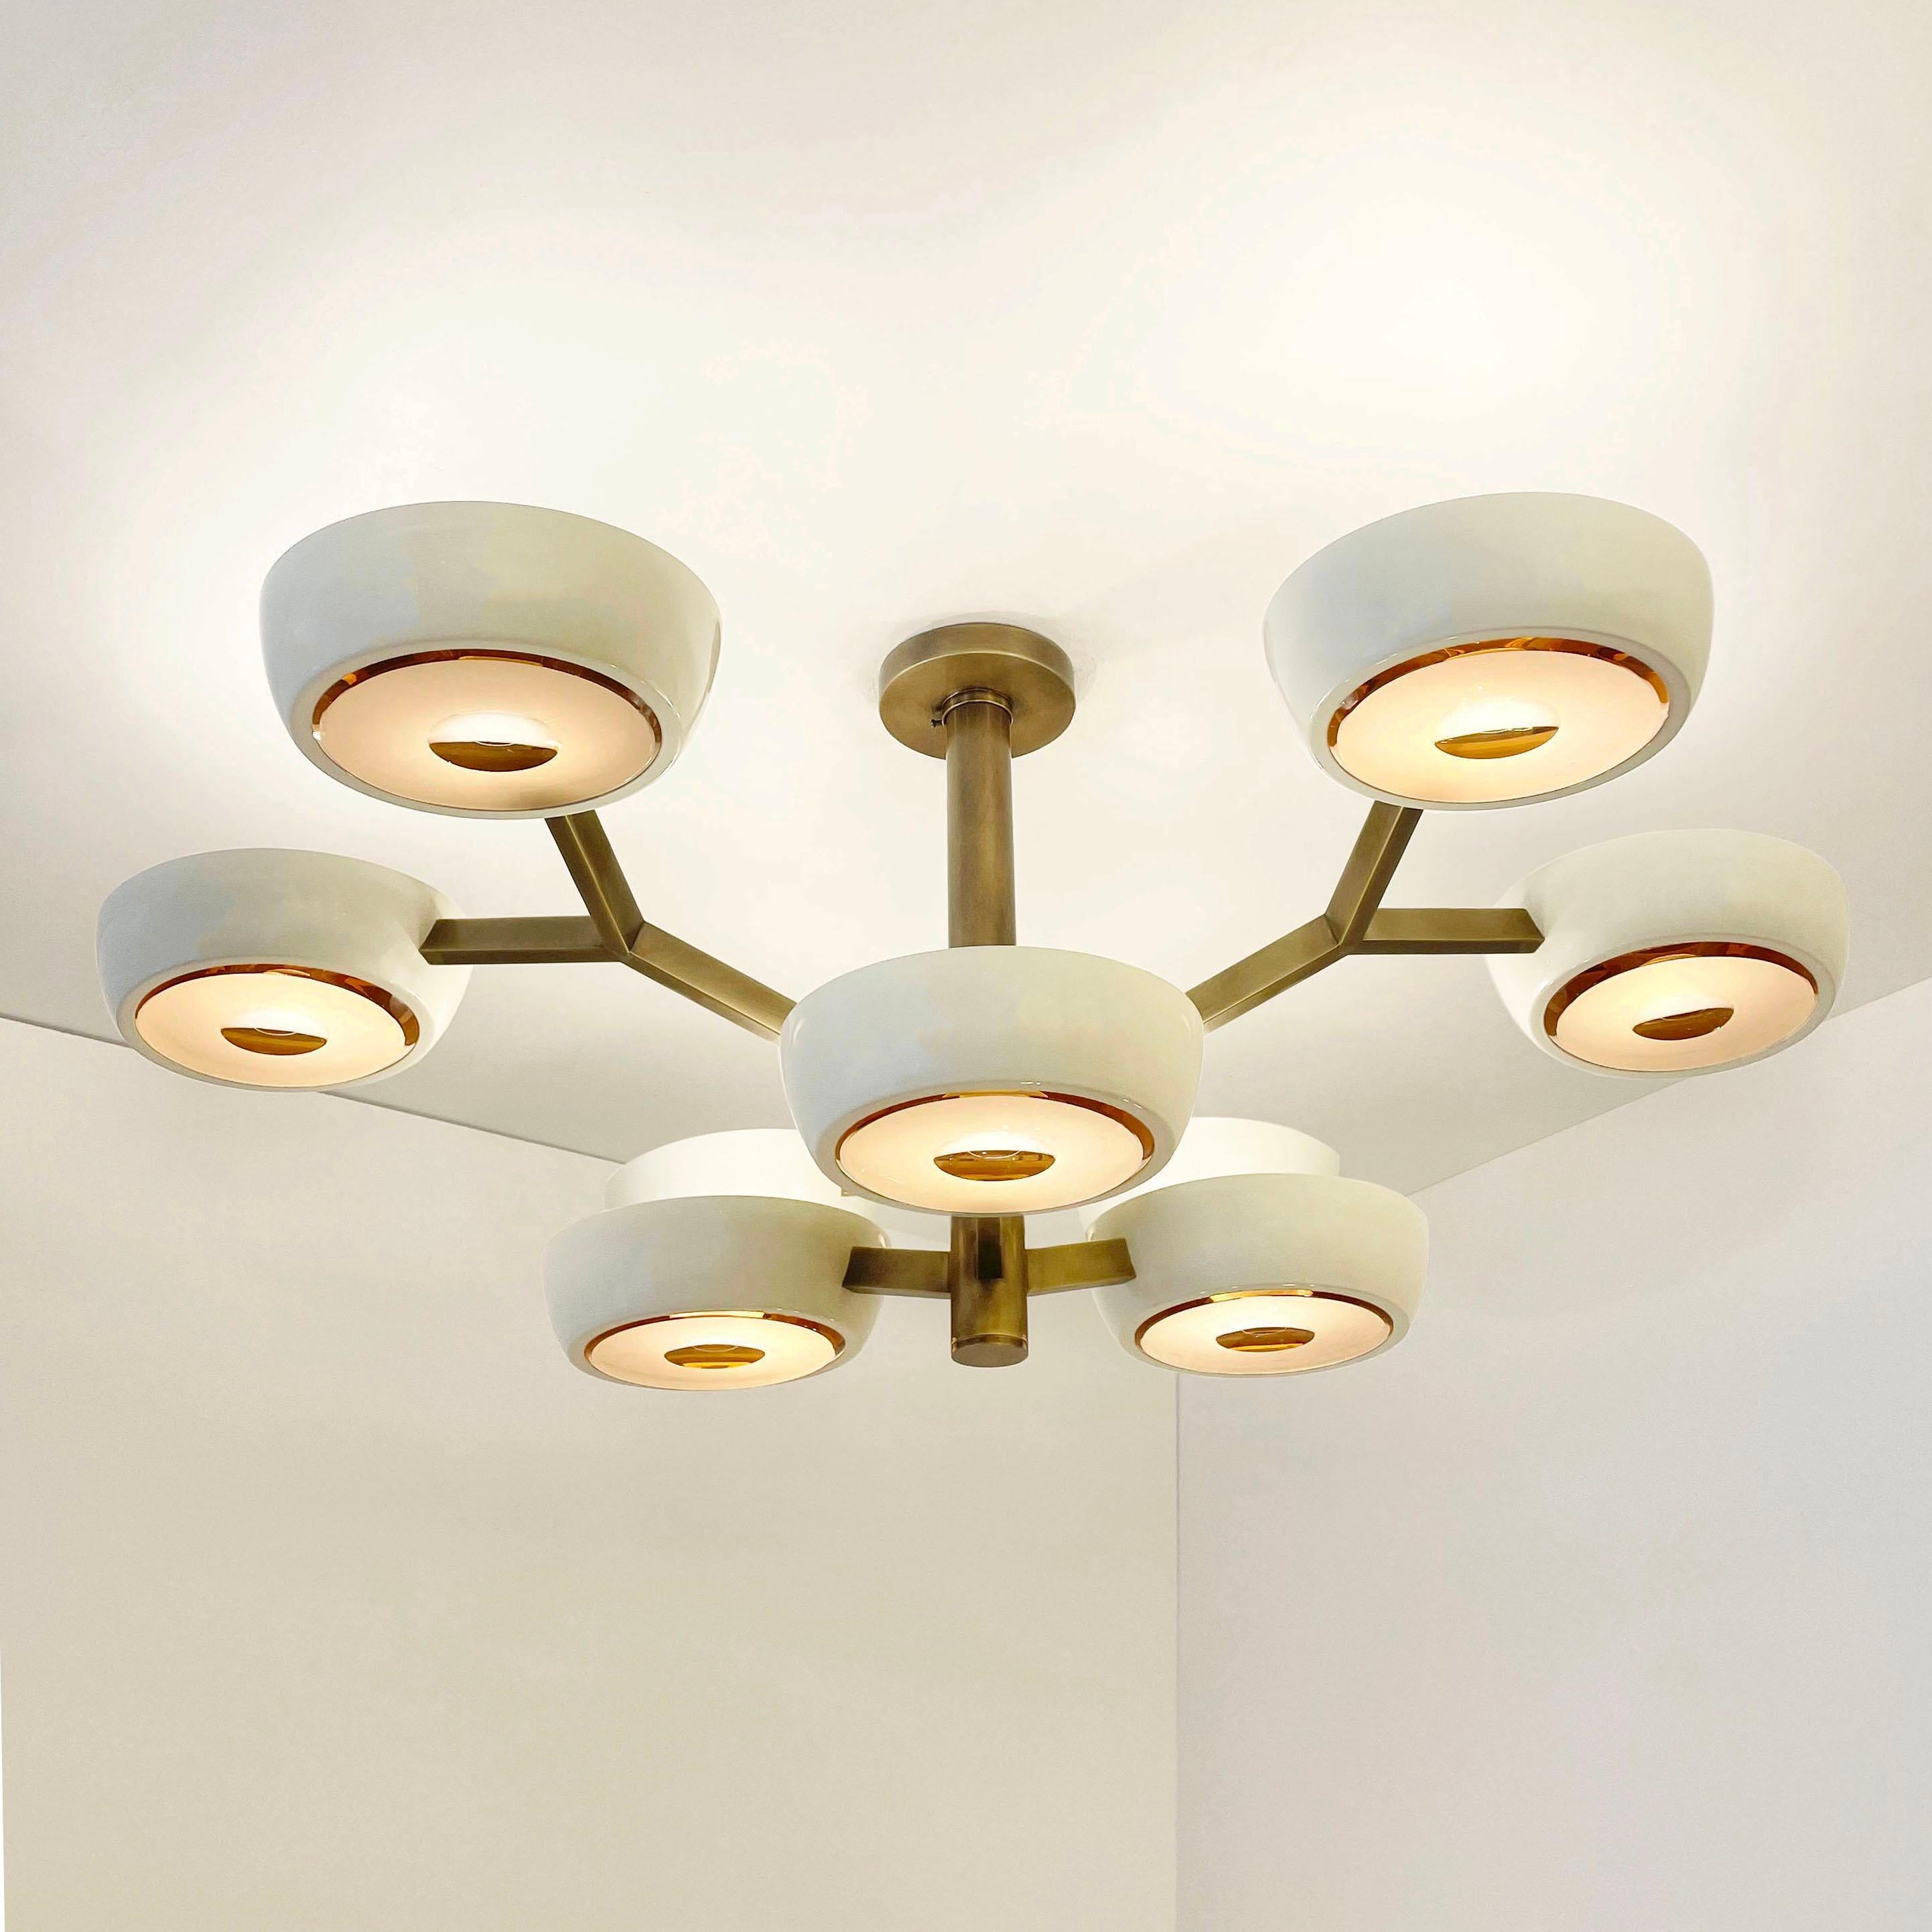 Rose Ceiling Light by Gaspare Asaro-Satin Nickel Finish In New Condition For Sale In New York, NY